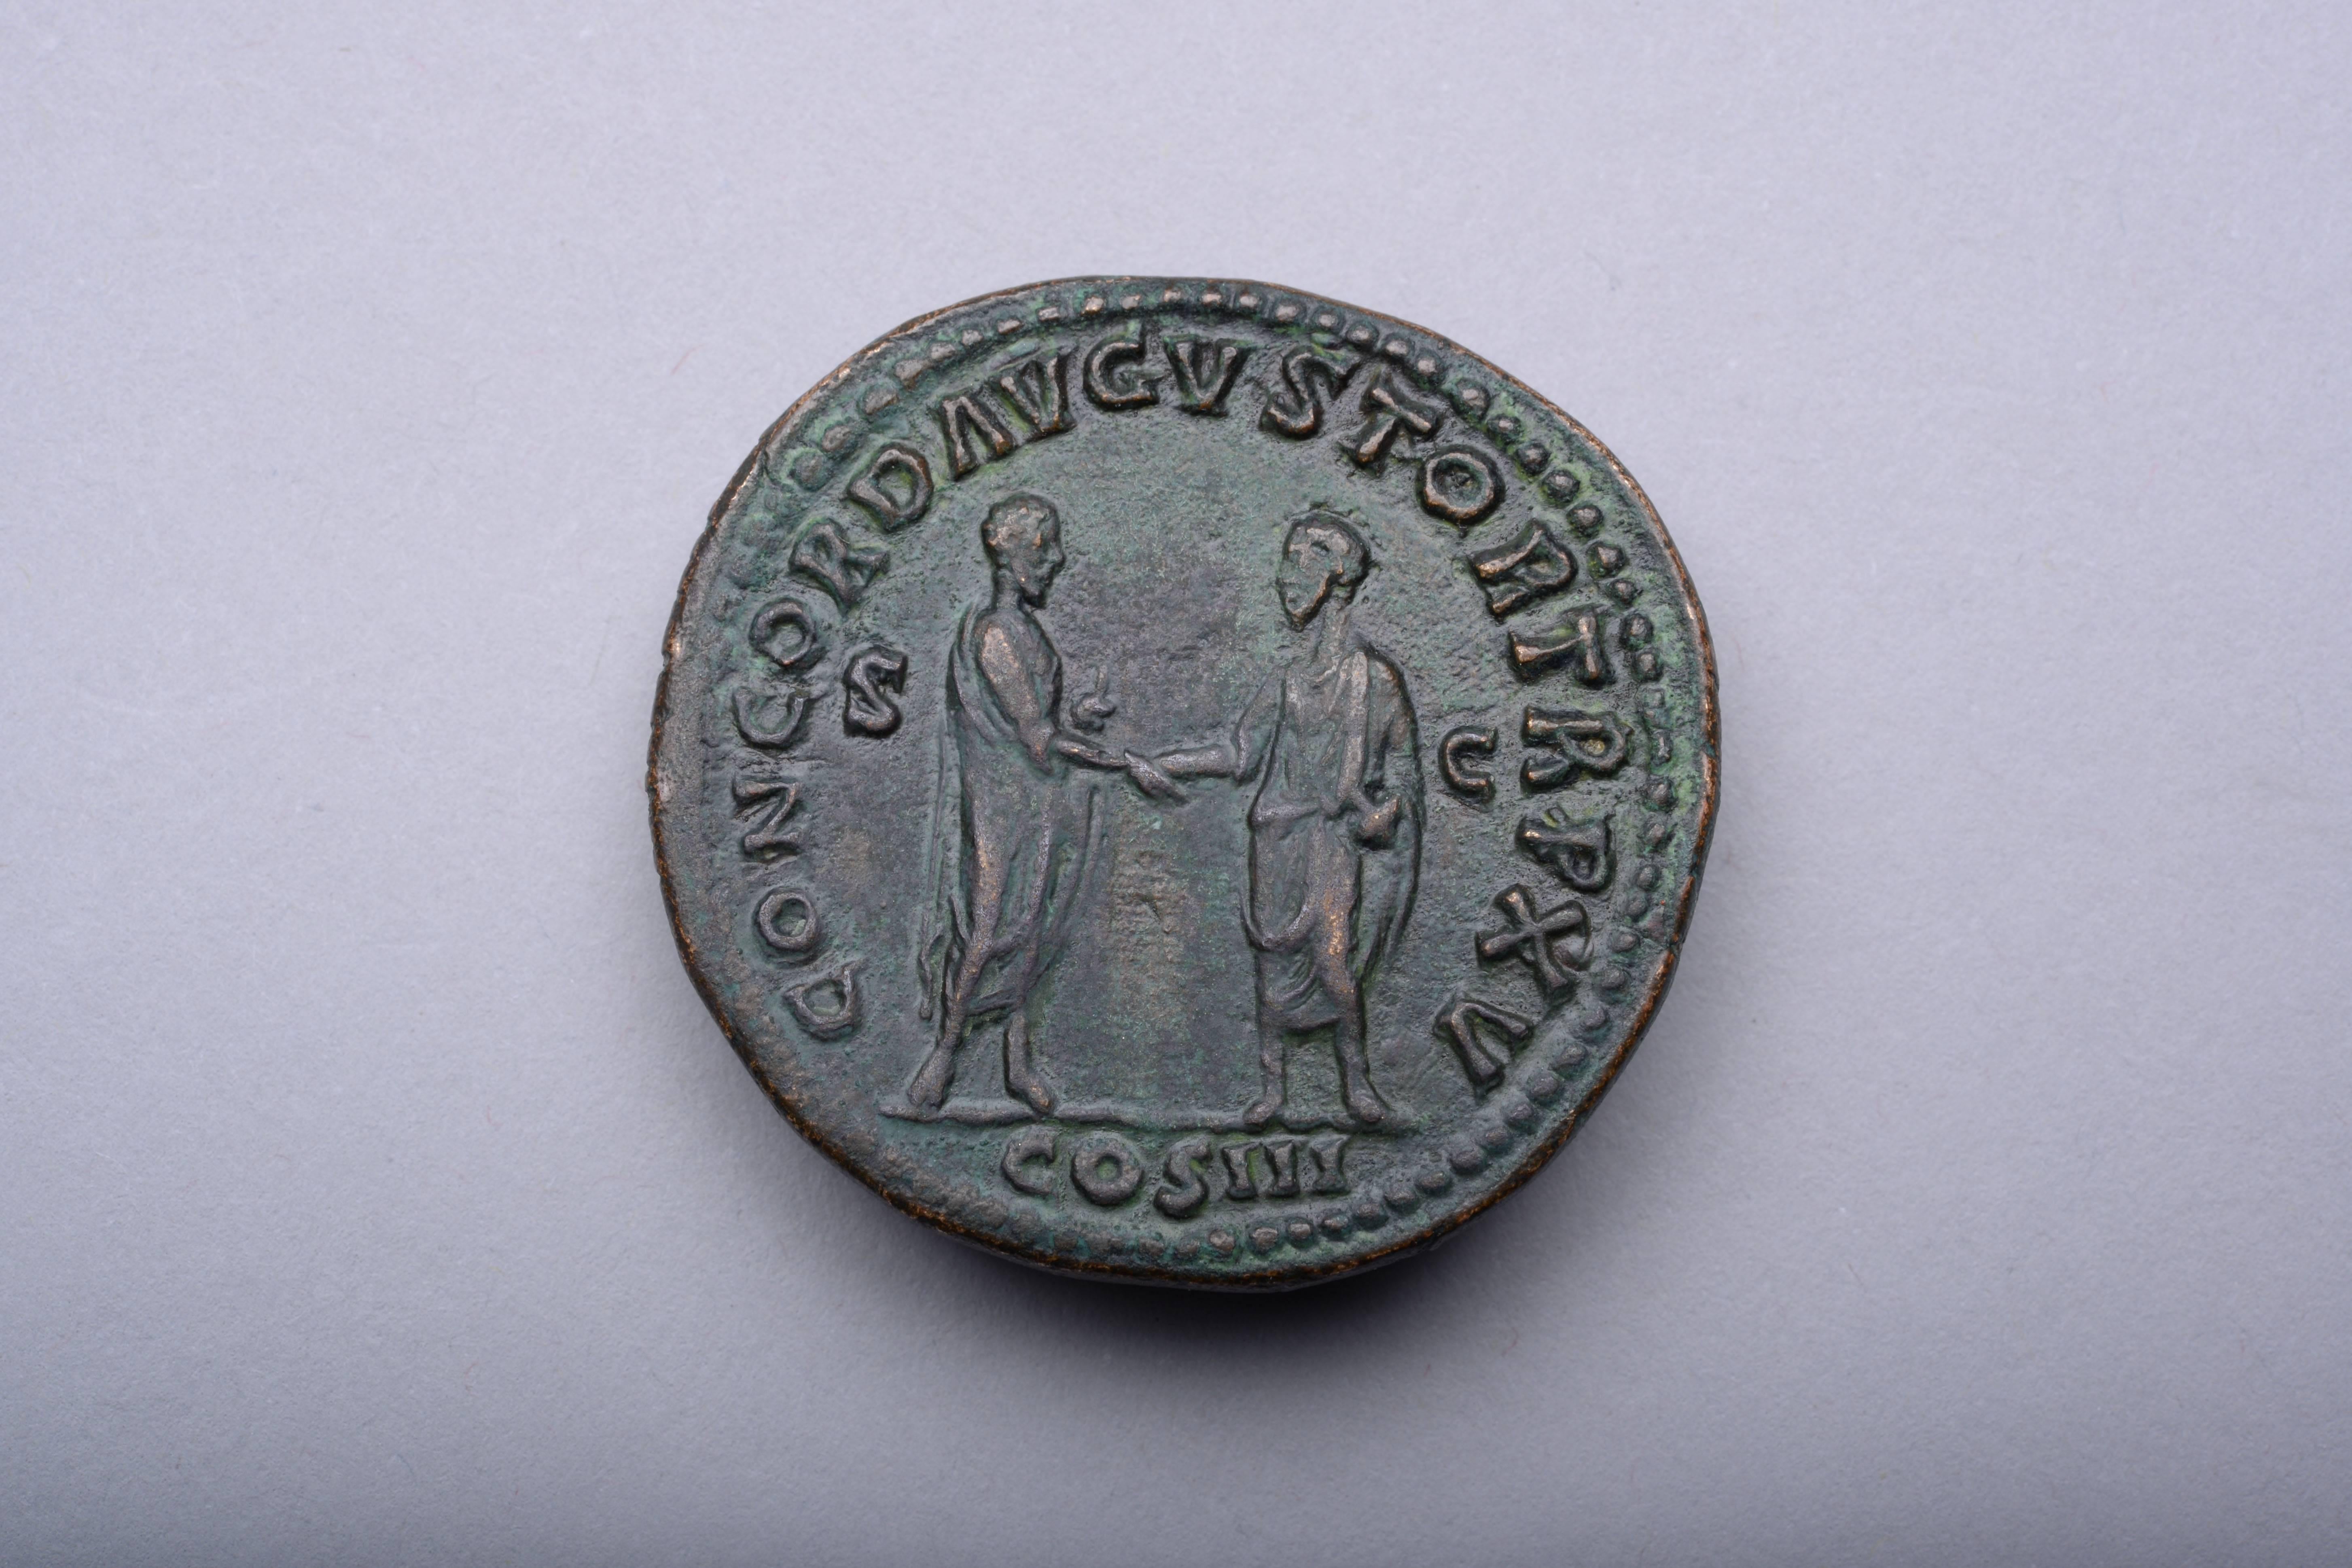 A very attractive, well provenanced sestertius minted under one of Rome's greatest ever rulers, Emperor Marcus Aurelius (Marcus Aurelius Antoninus Augustus). Struck 7th March 161-17th March 180 AD at the Rome mint.

The obverse with the iconic